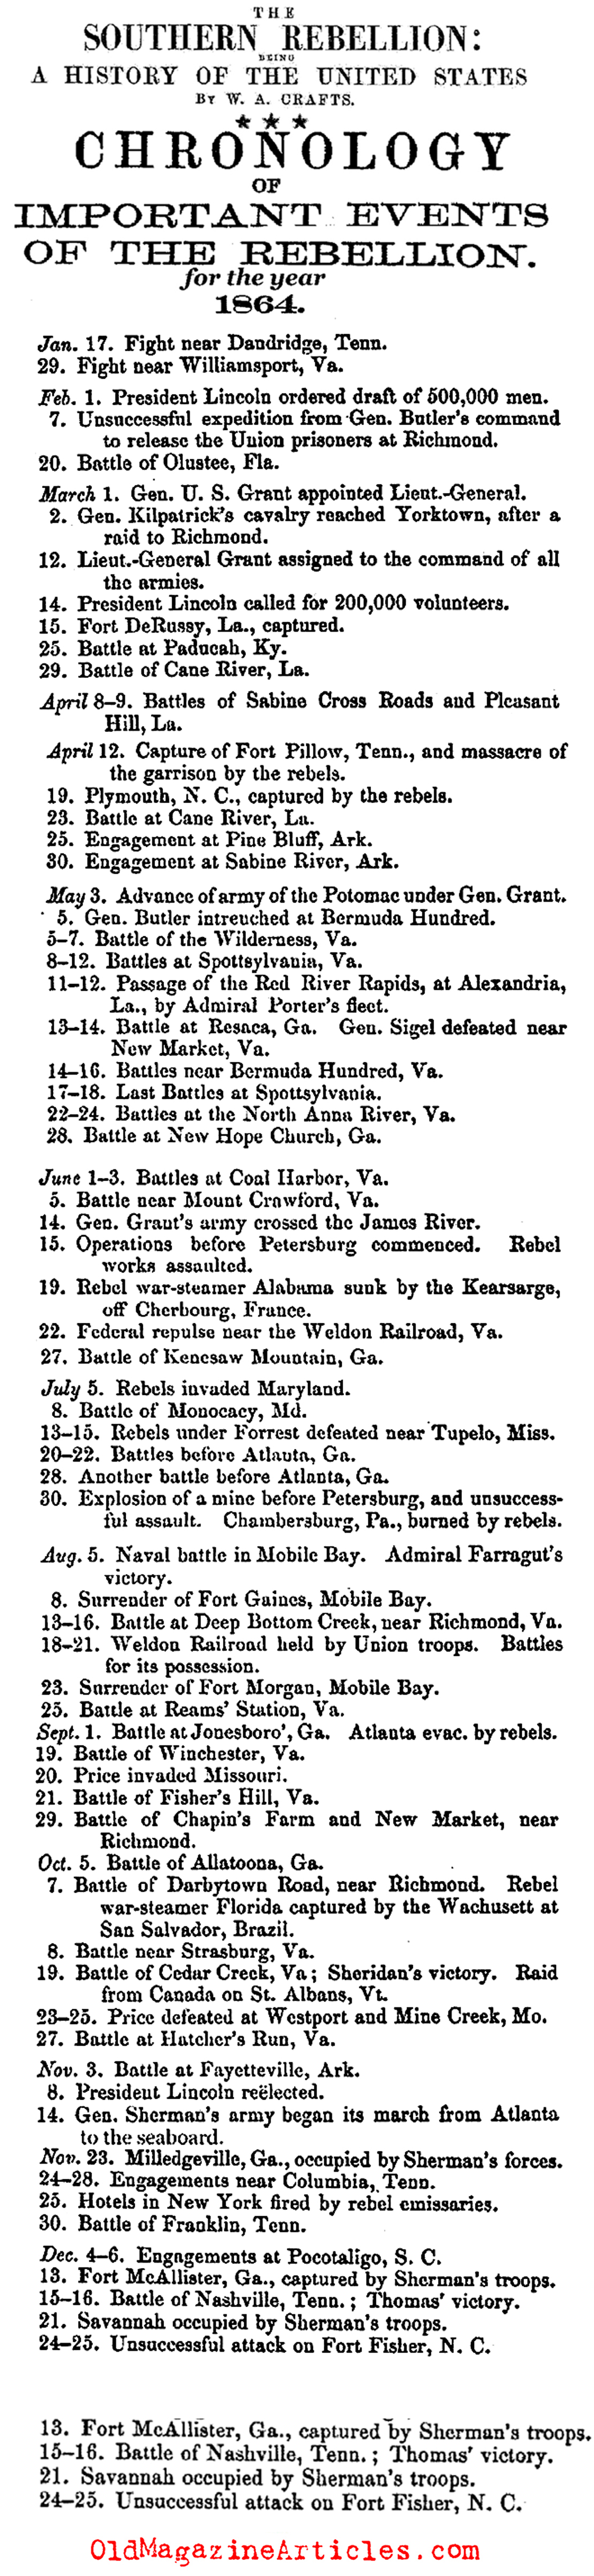 The Civil War in 1864 (Southern Rebellion, 1867)